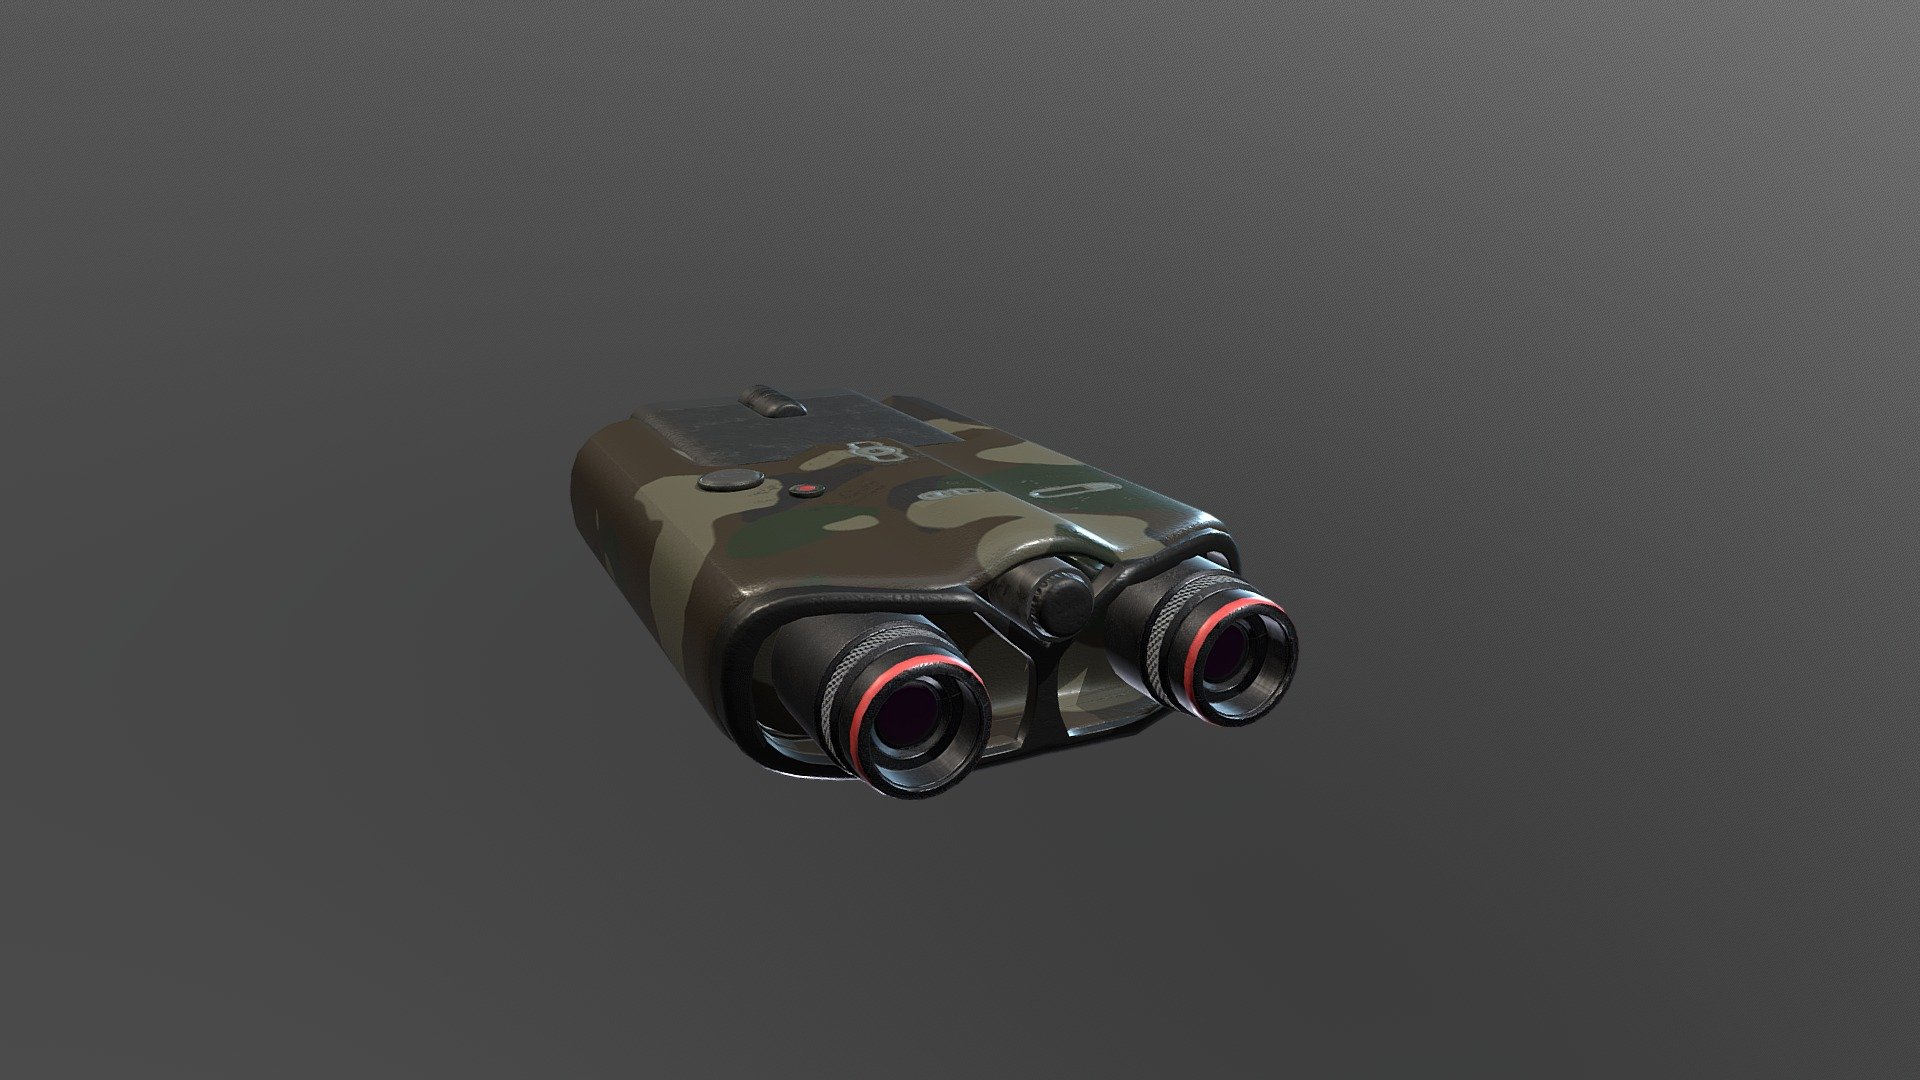 Modeled in 3Ds Max, textured in Substance painter. 2K textures 3d model